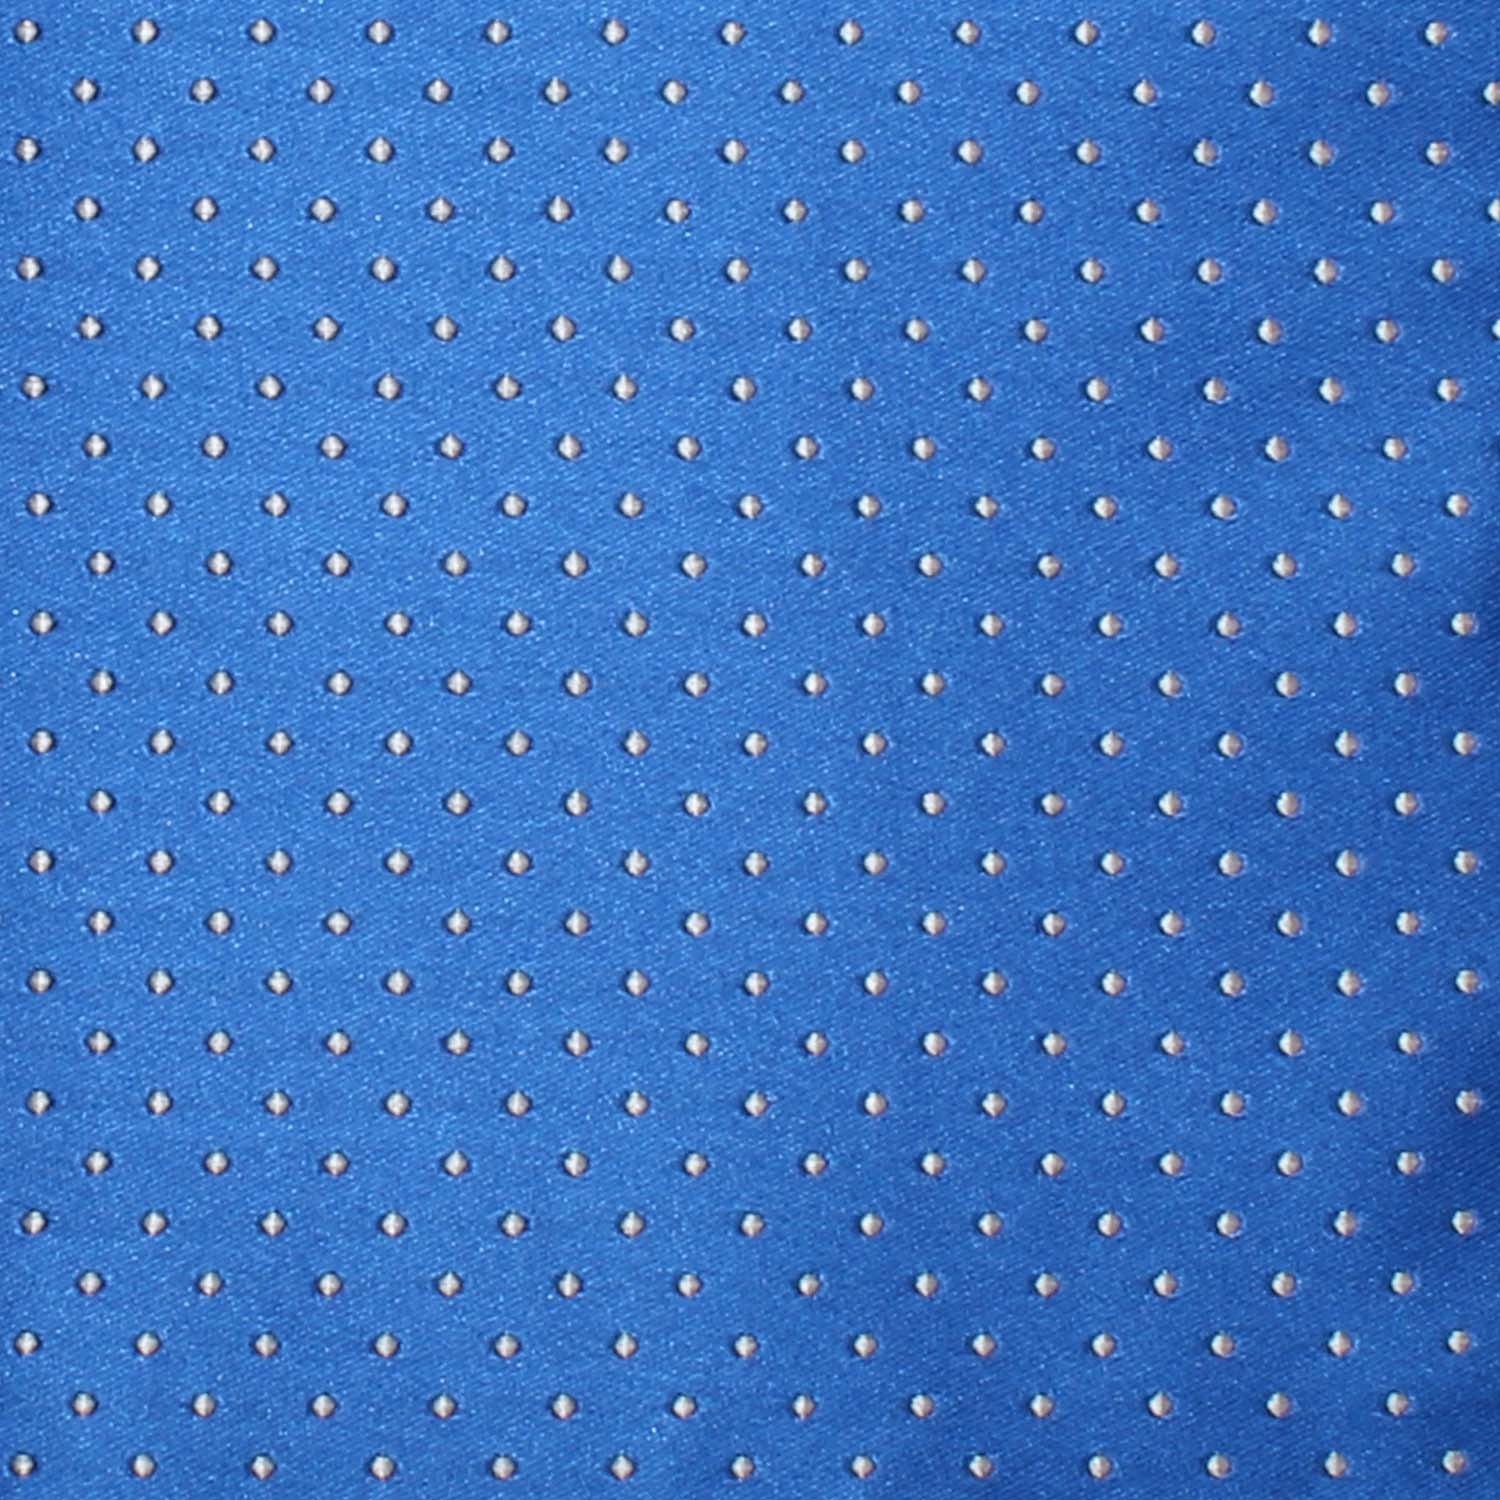 Sea Blue with White Polka Dots Fabric Skinny Tie X445